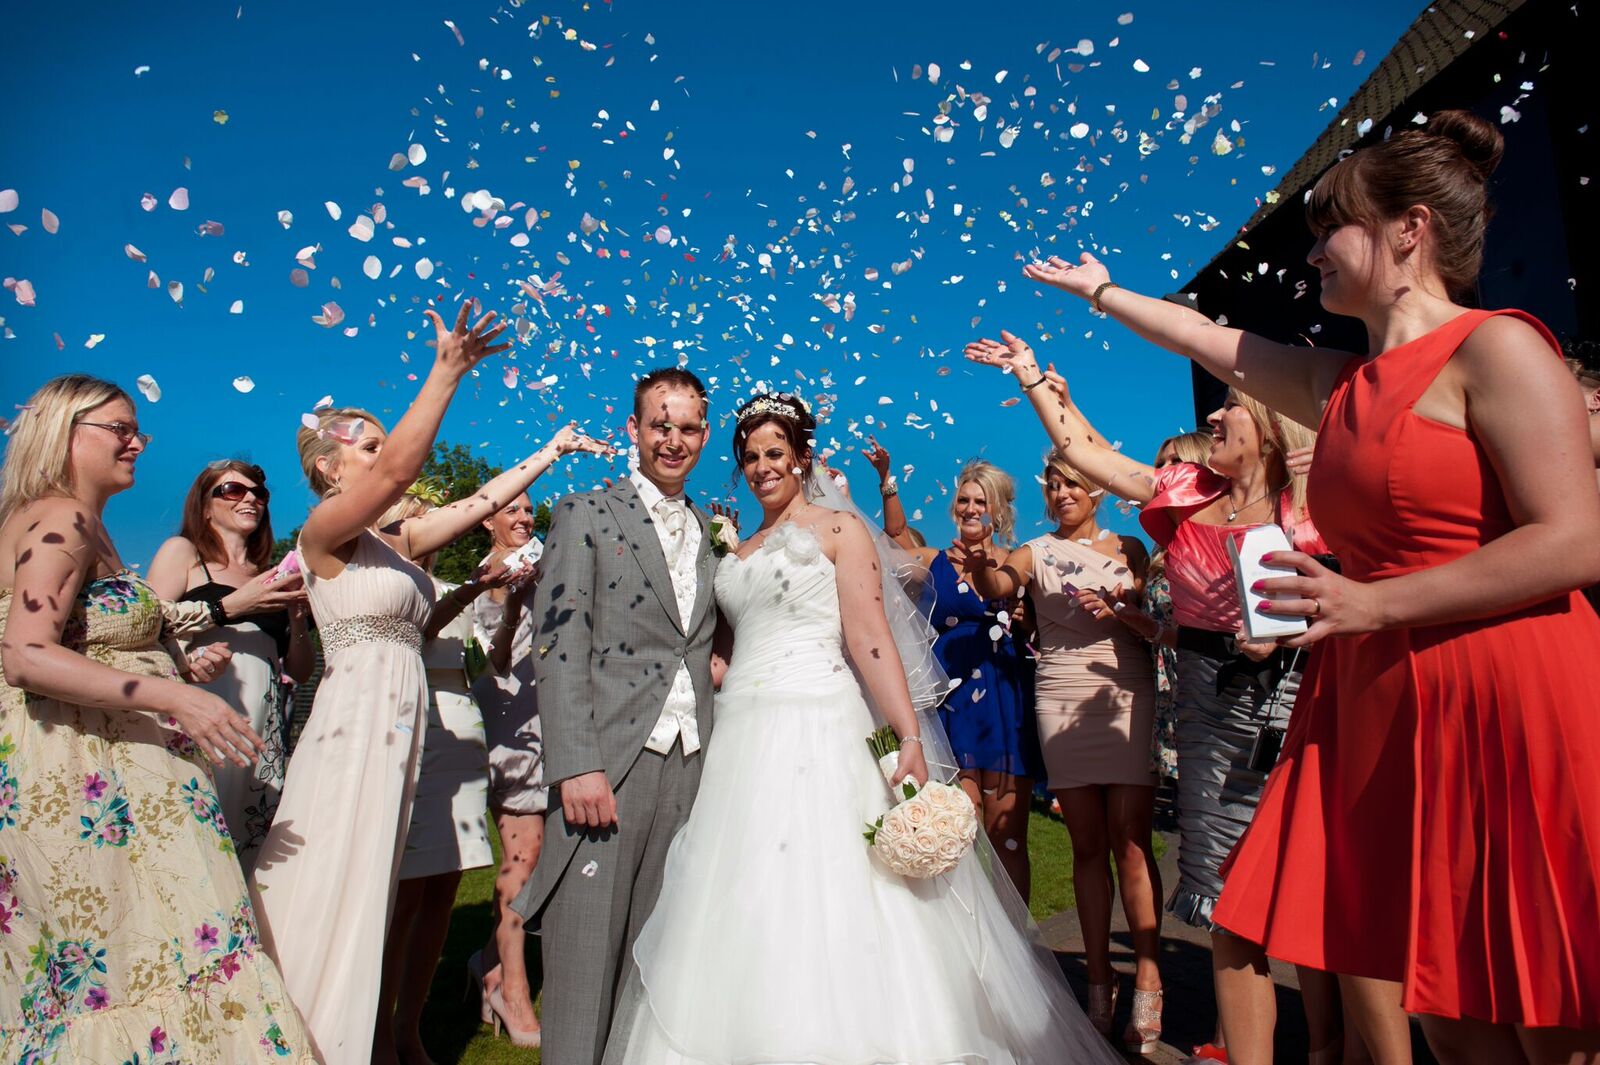 Top Tips for Finding a Wedding Venue for Your Special Day